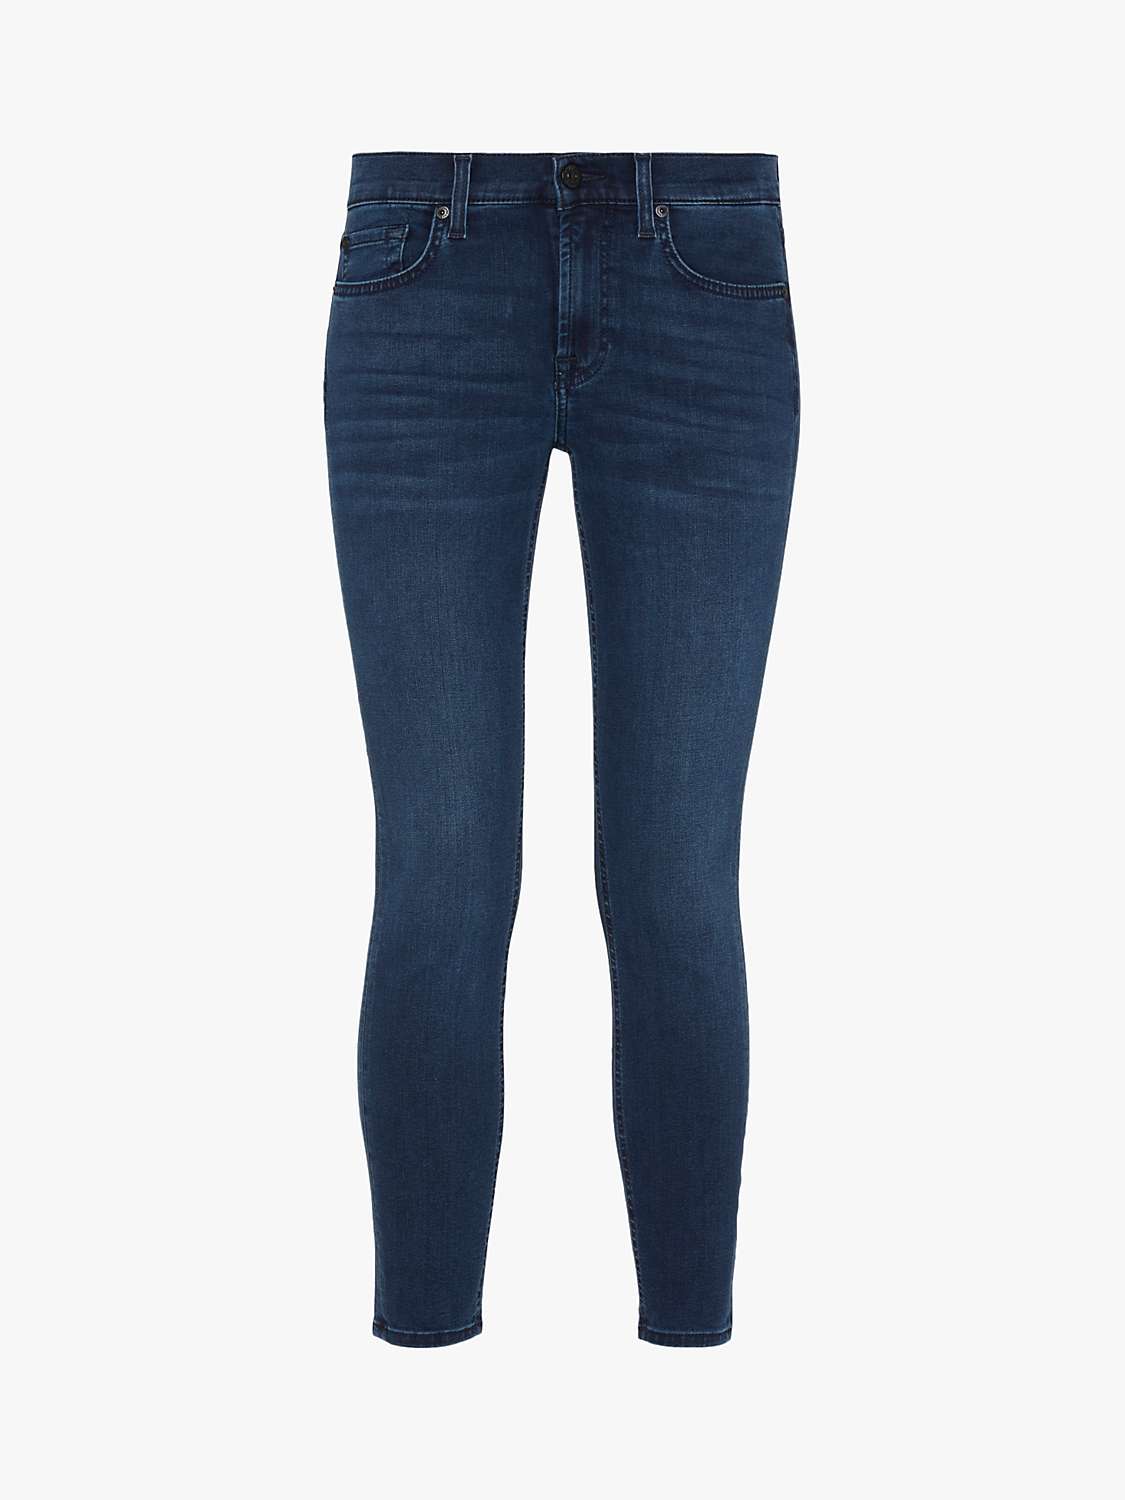 Buy 7 For All Mankind Skinny B(Air) Jeans, Park Avenue Online at johnlewis.com